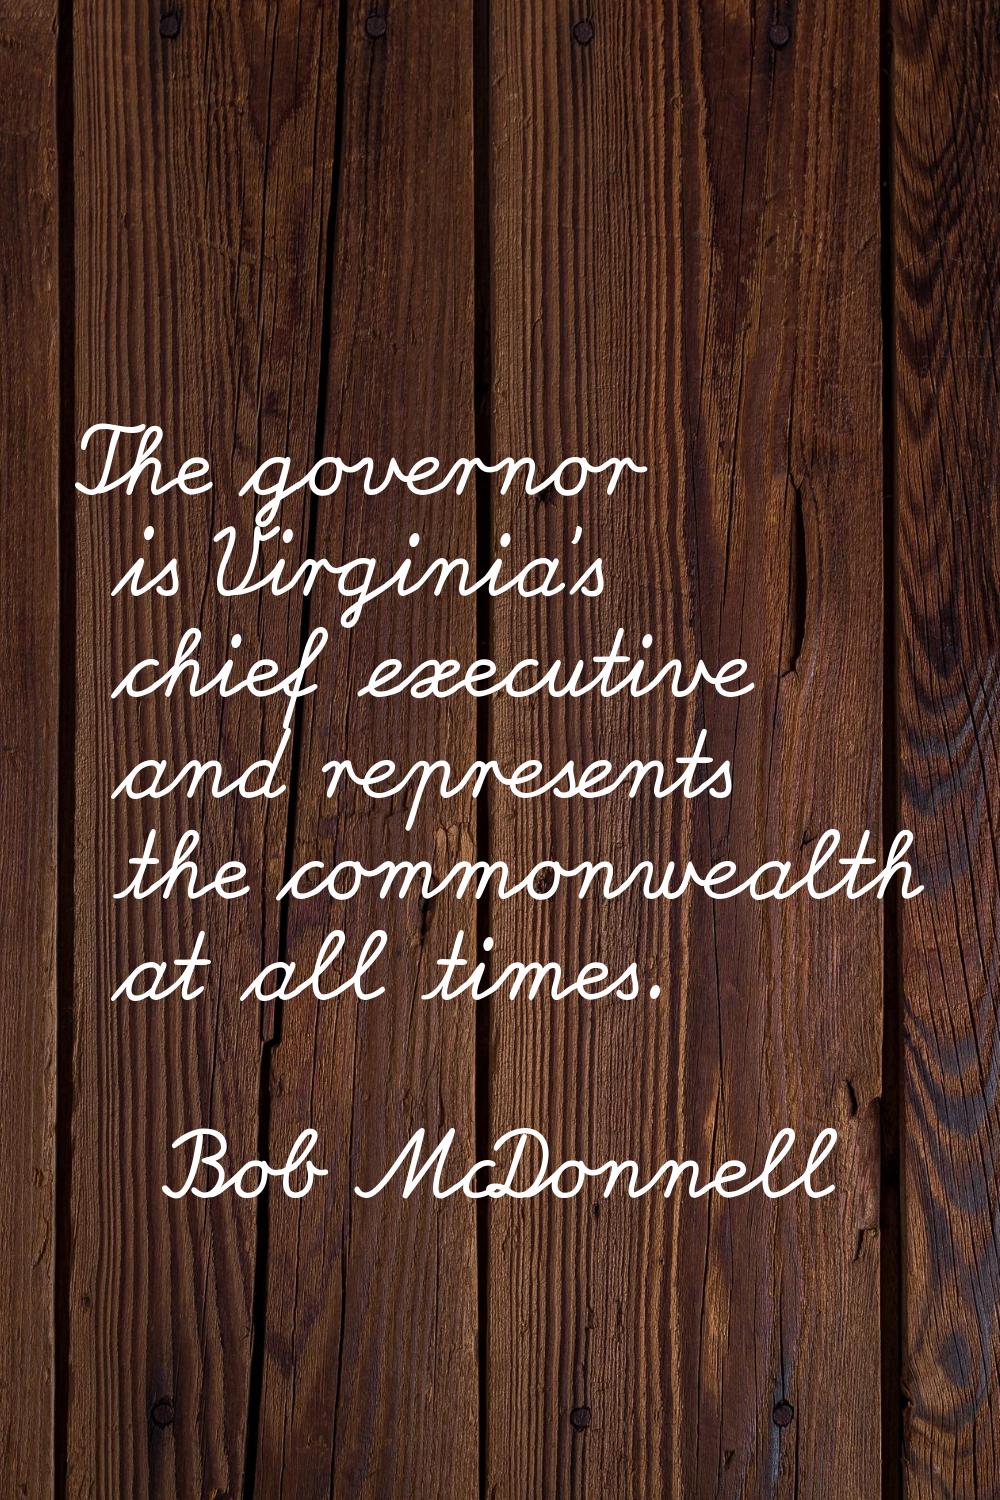 The governor is Virginia's chief executive and represents the commonwealth at all times.